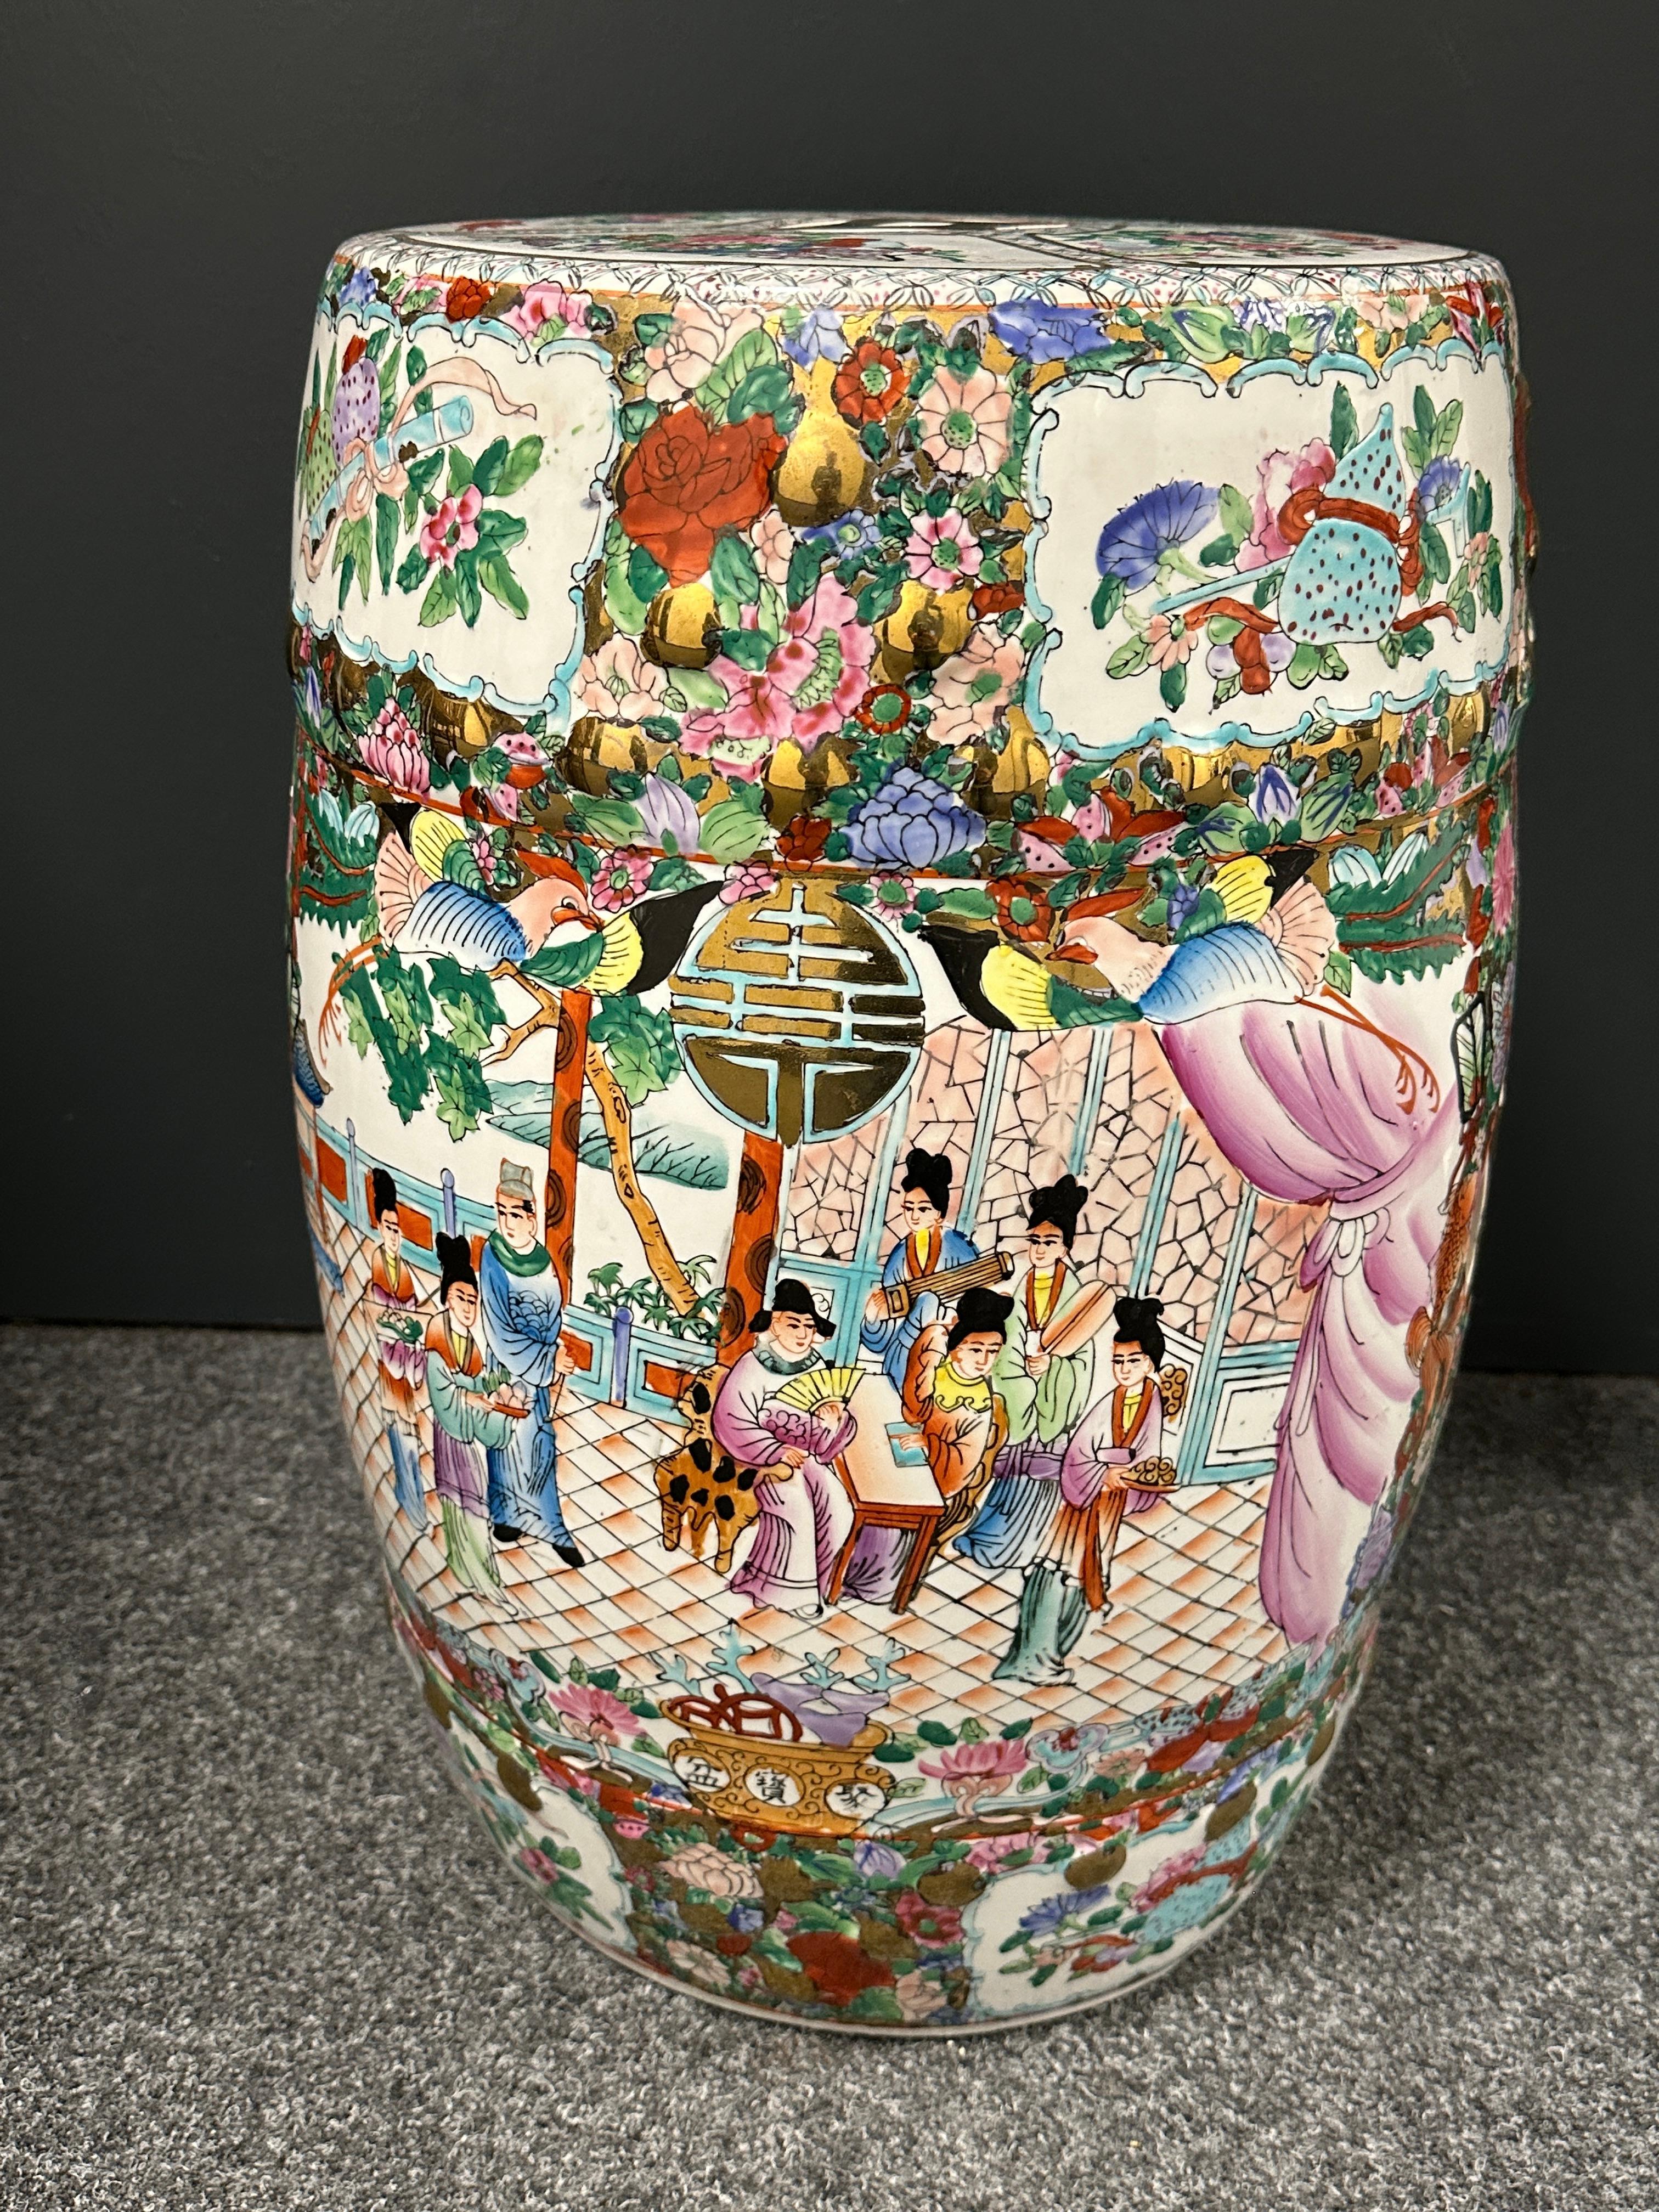 Ceramic Mid-20th Century Chinese Export Hand-Painted Garden Stool Flower Pot Seat